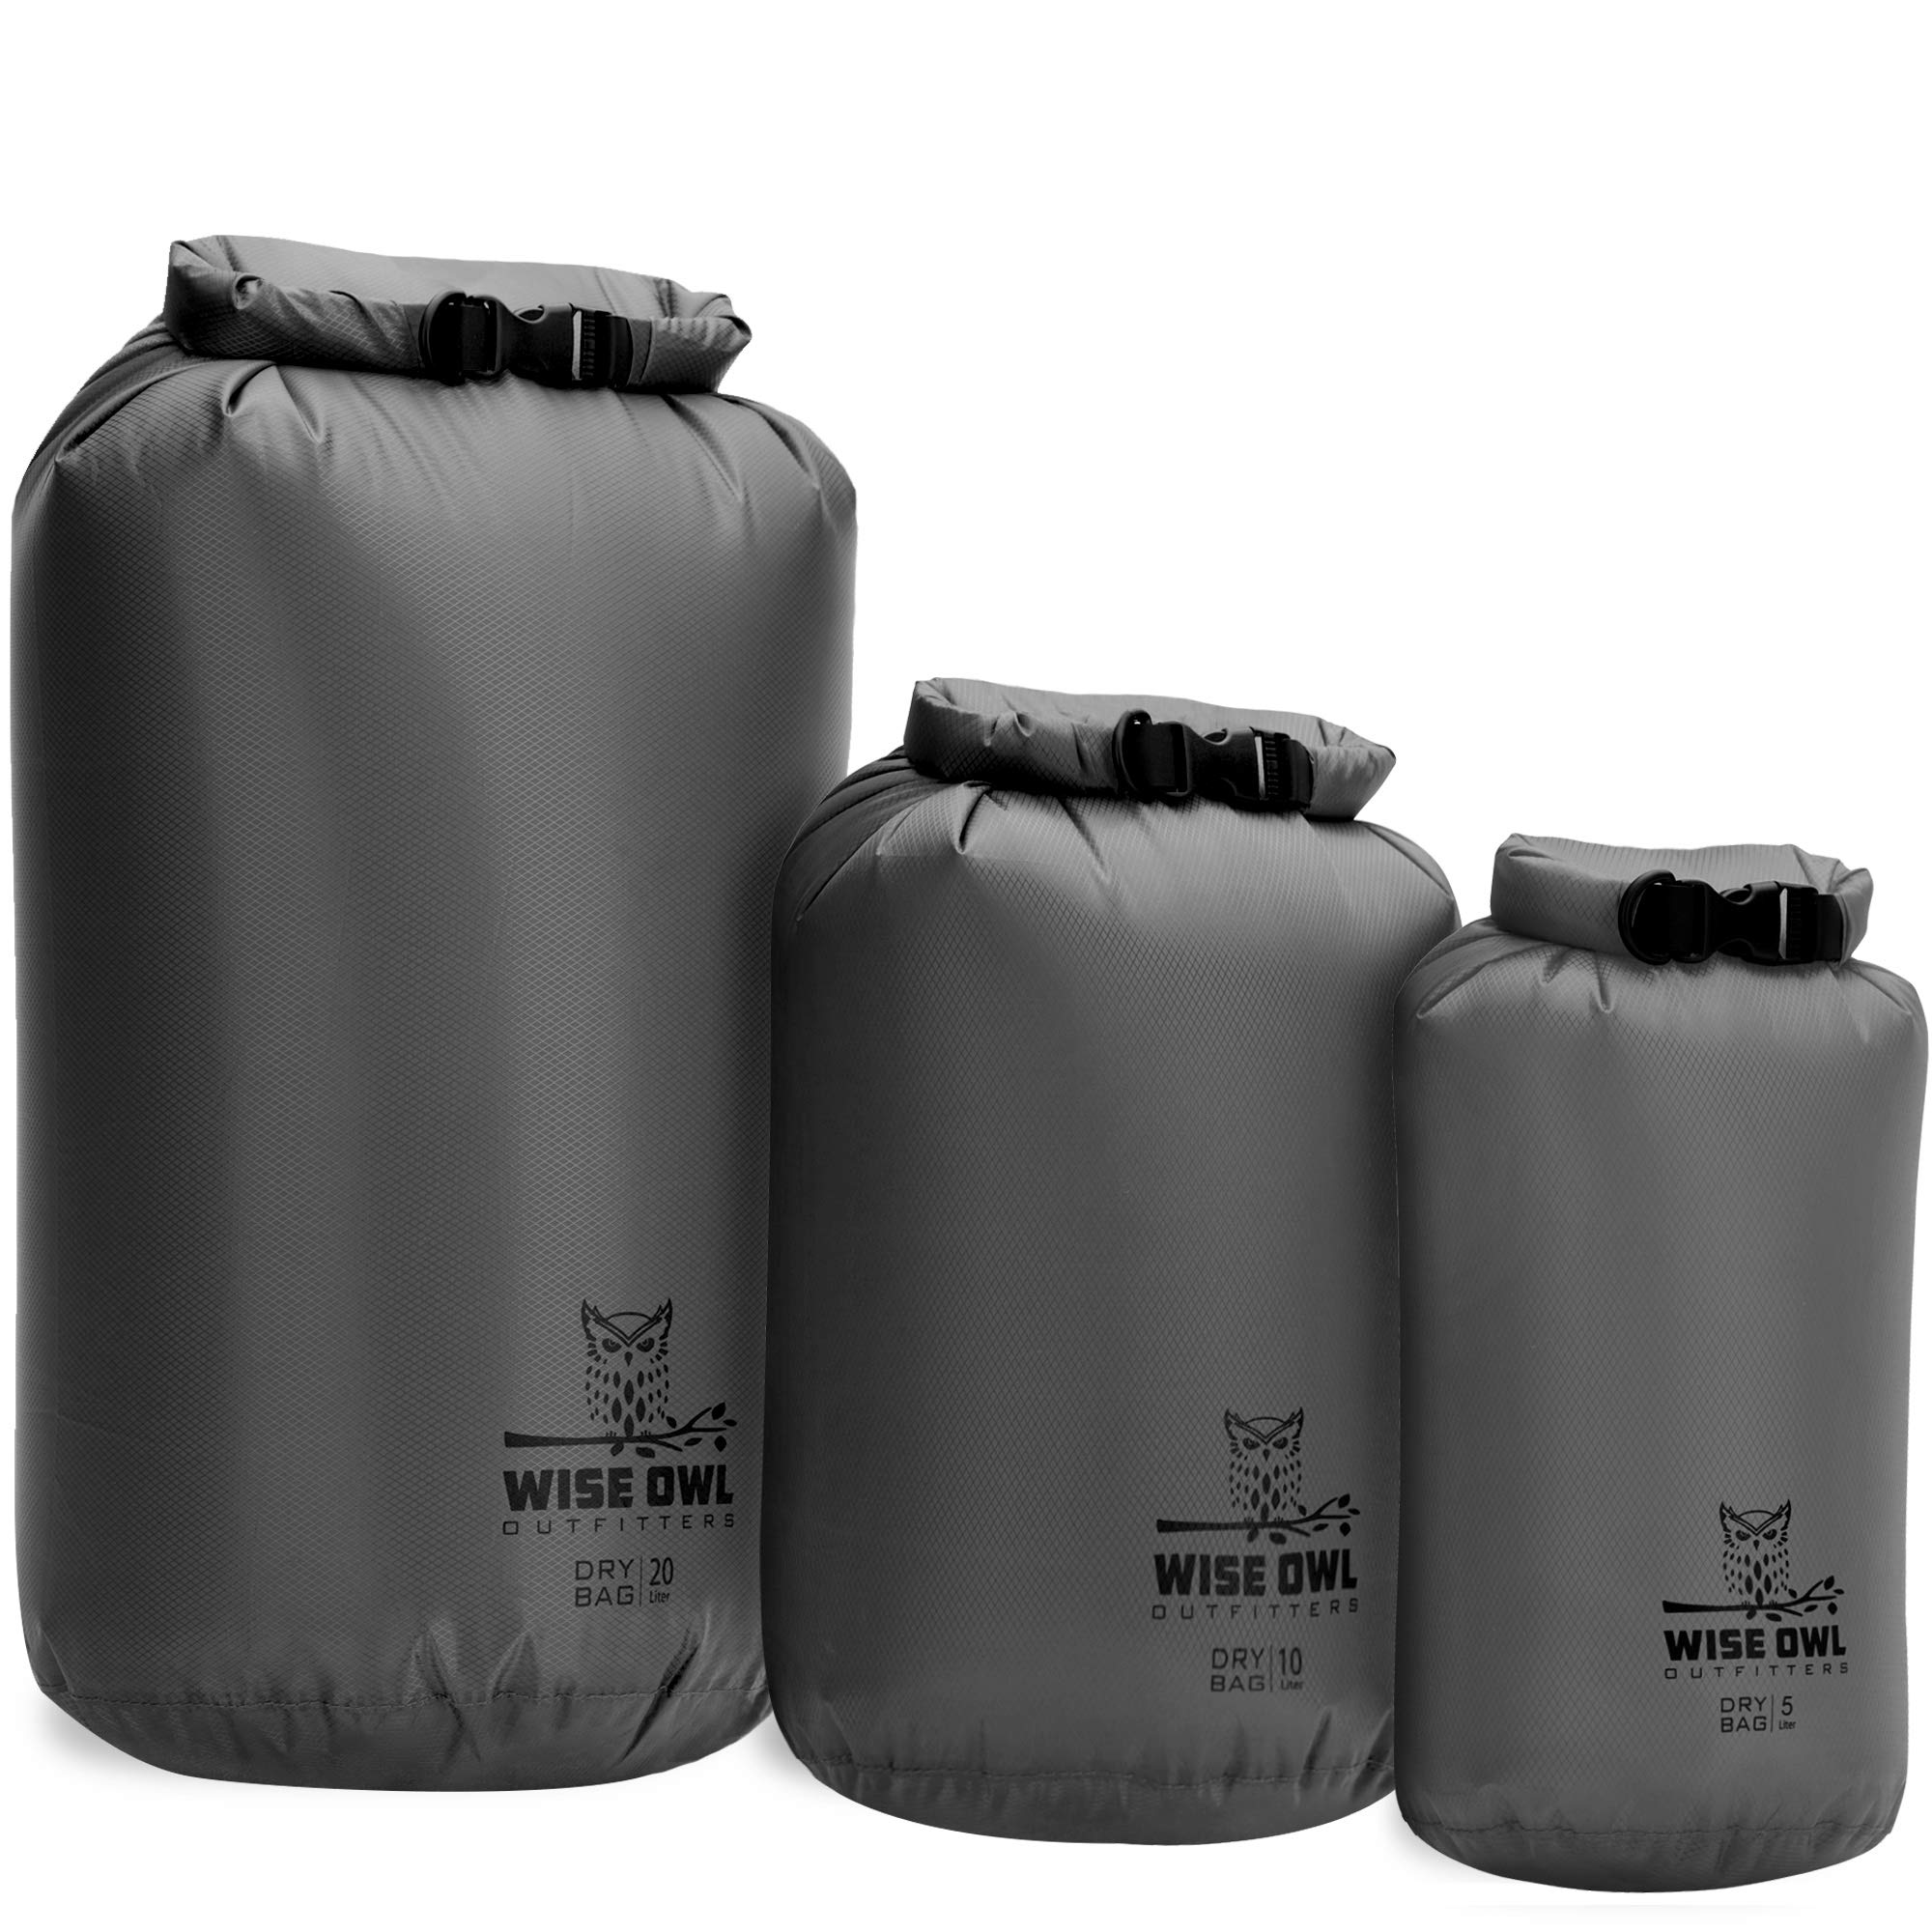 Wise Owl Outfitters Waterproof Dry Bag - Fully Submersible 1pk or